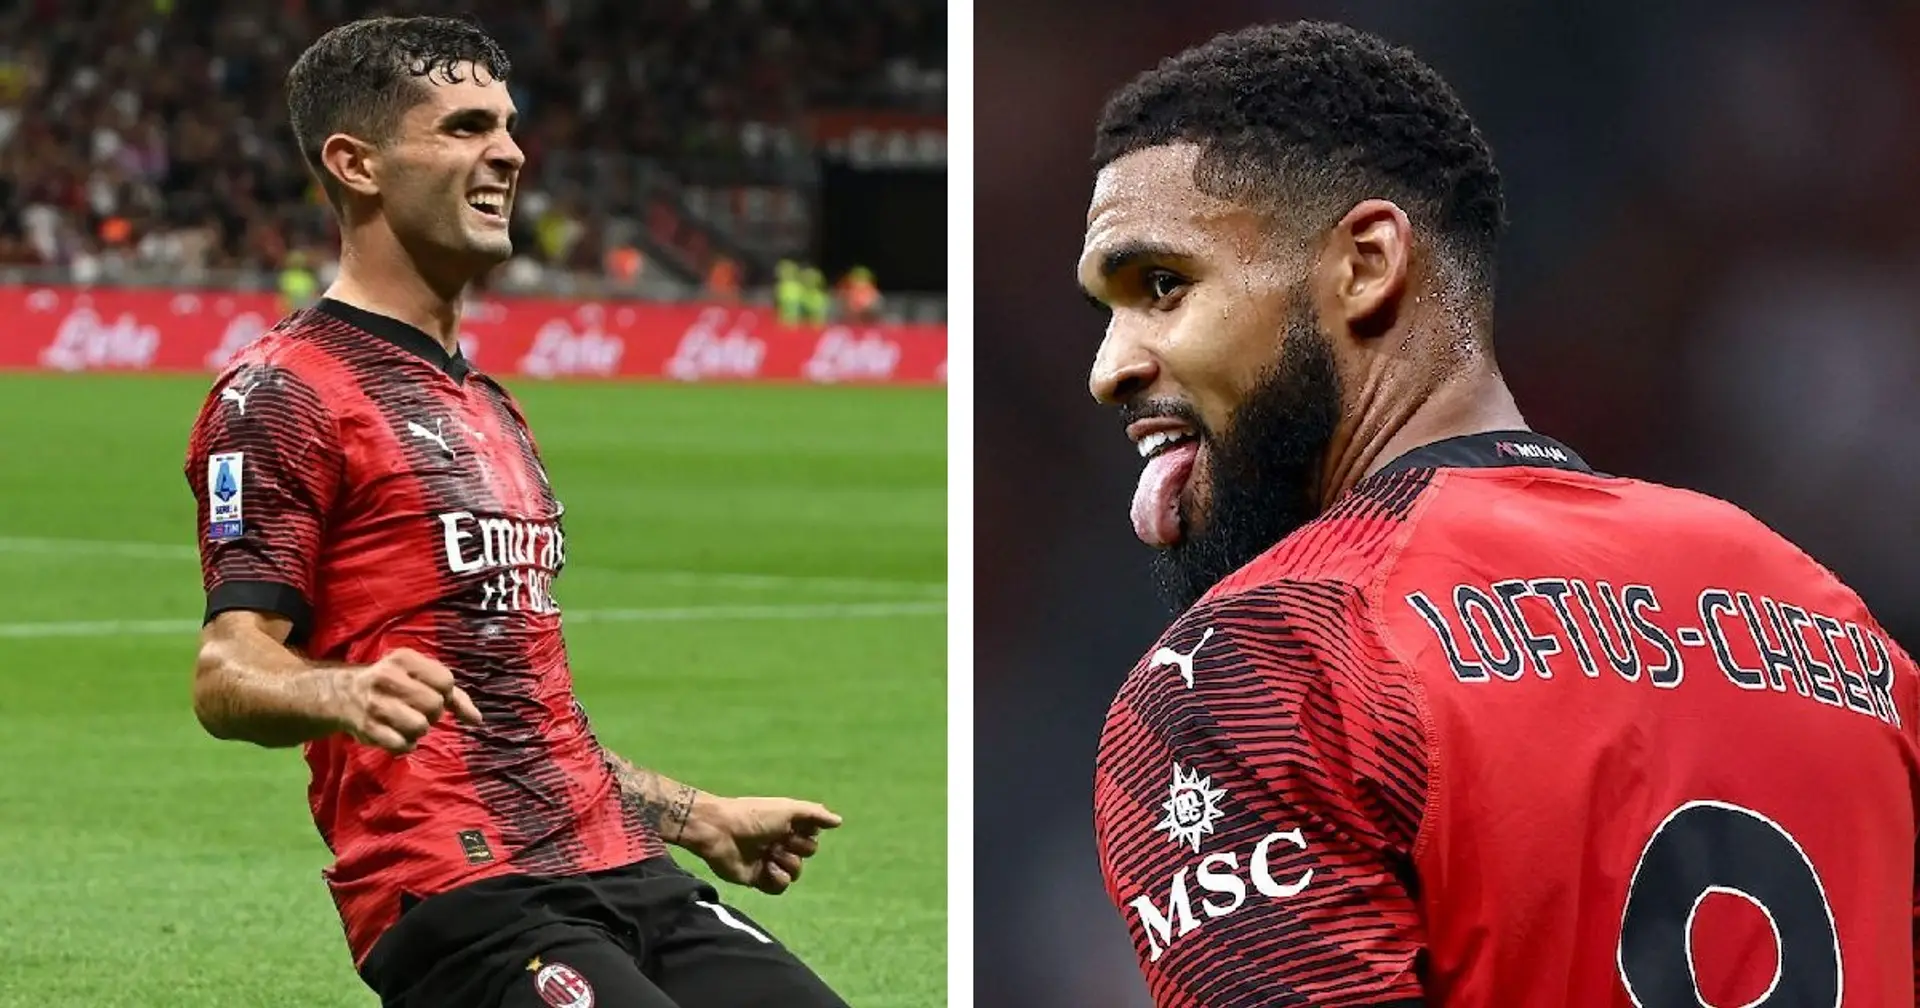 Former Chelsea boys Loftus-Cheek and Pulisic combine for wonderful team goal for AC Milan (video)